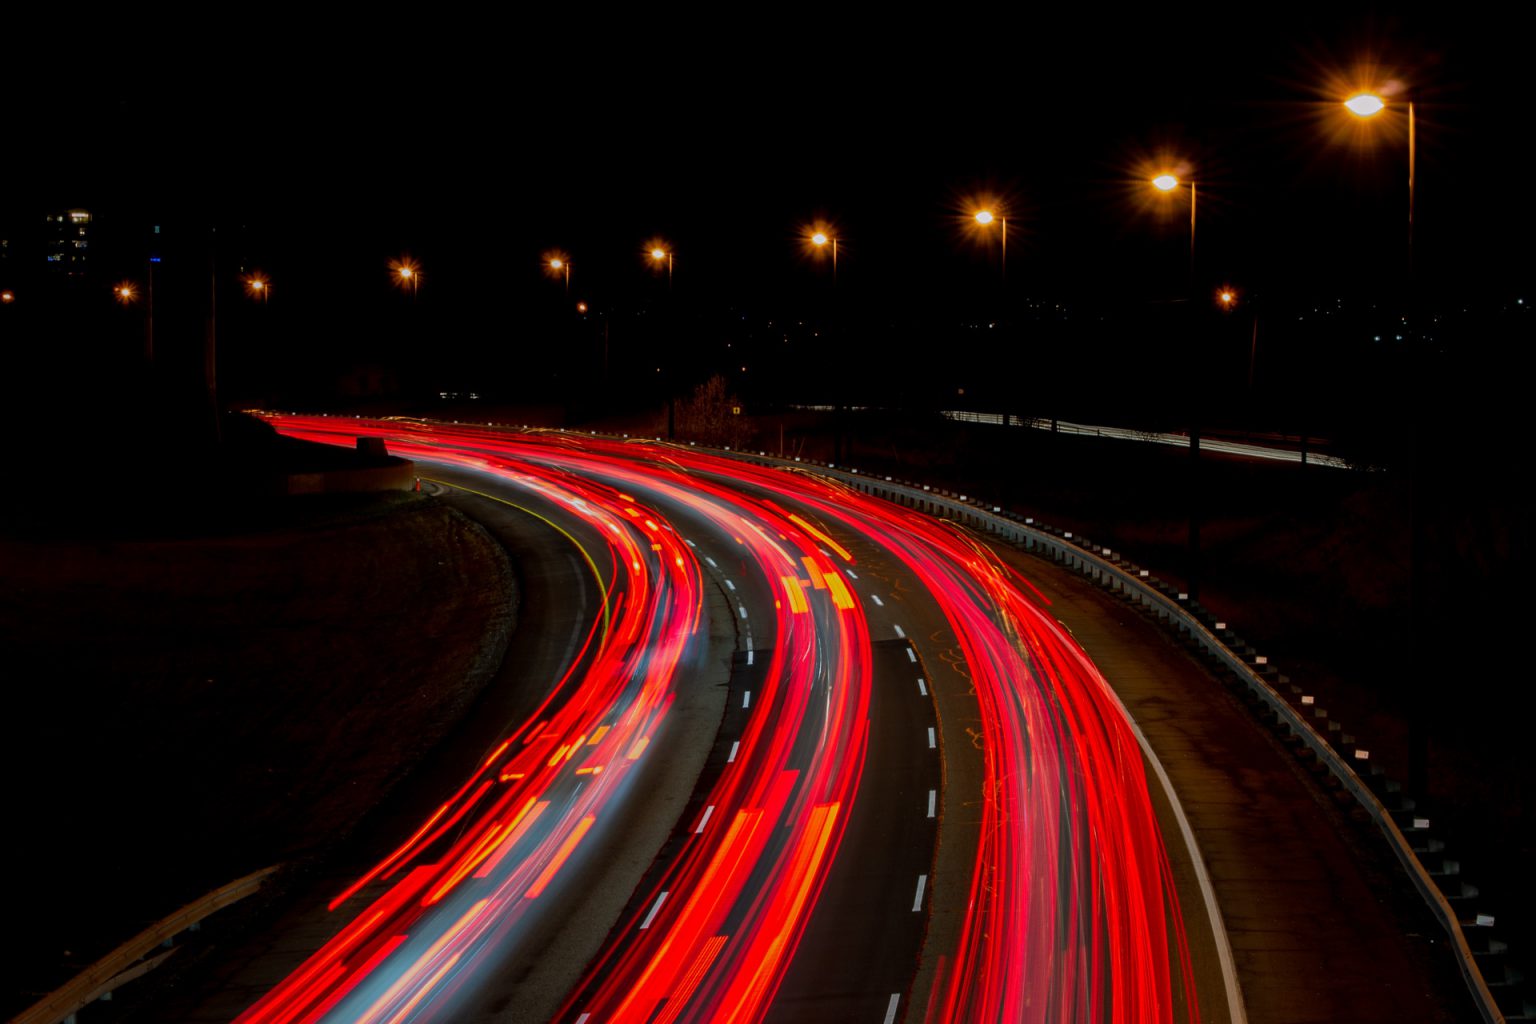 Blurry car lights on a highway at night